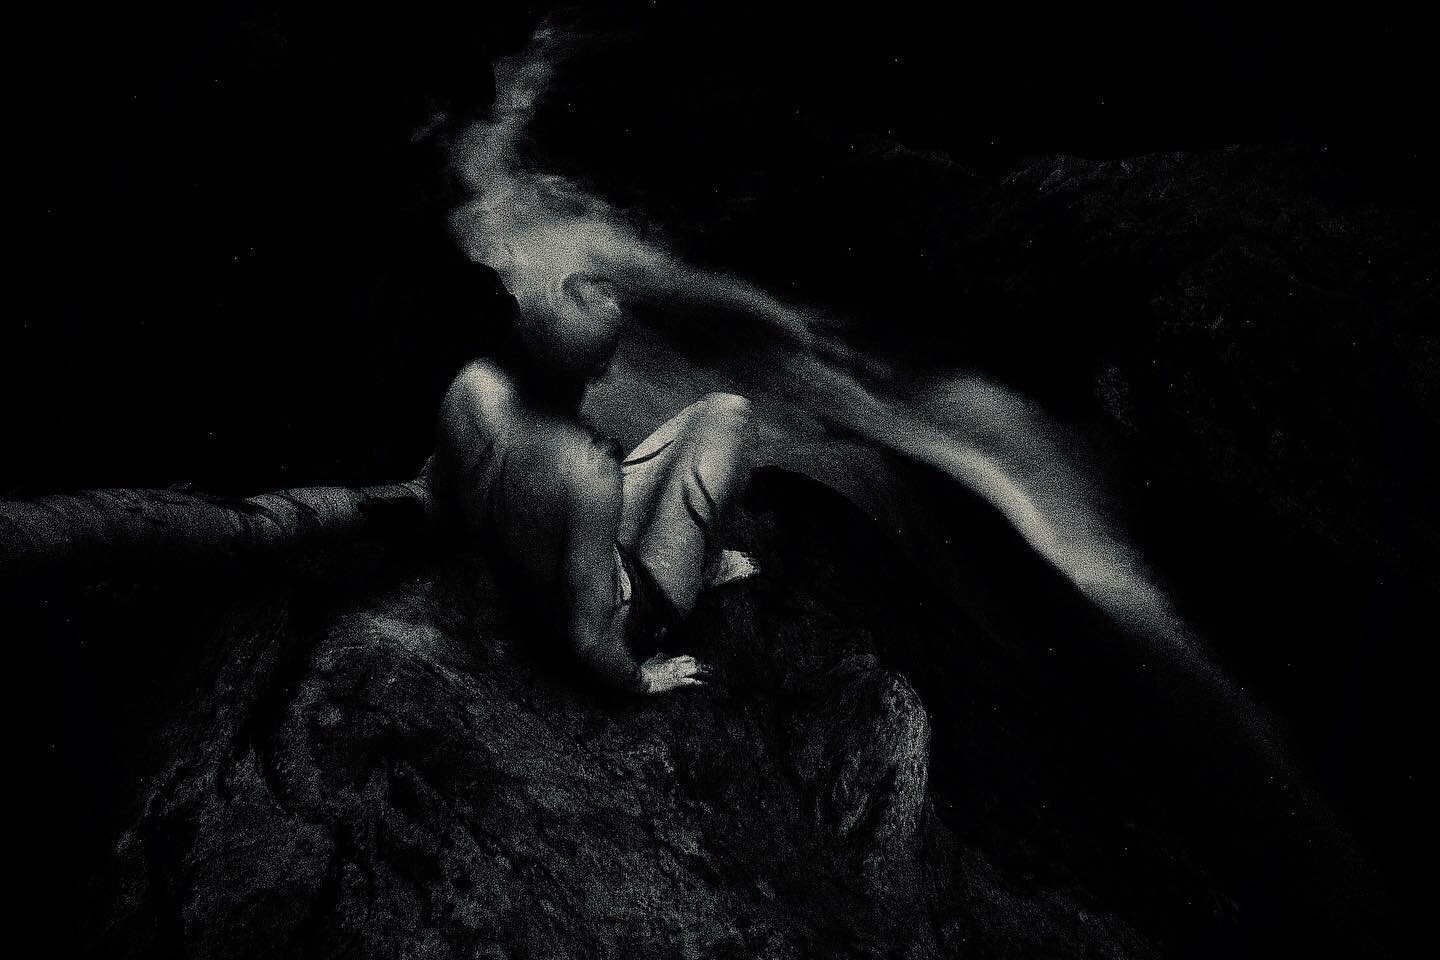 The skull moves, as does the water below. 

+

#ancient #ancestors #folklore #tribal #primitive #primeval #blackandwhitephotography #silvertone #bodypainting #natureportrait #blackmetalphotography #darkphotography #waterfall #butoh #finnishfolklore